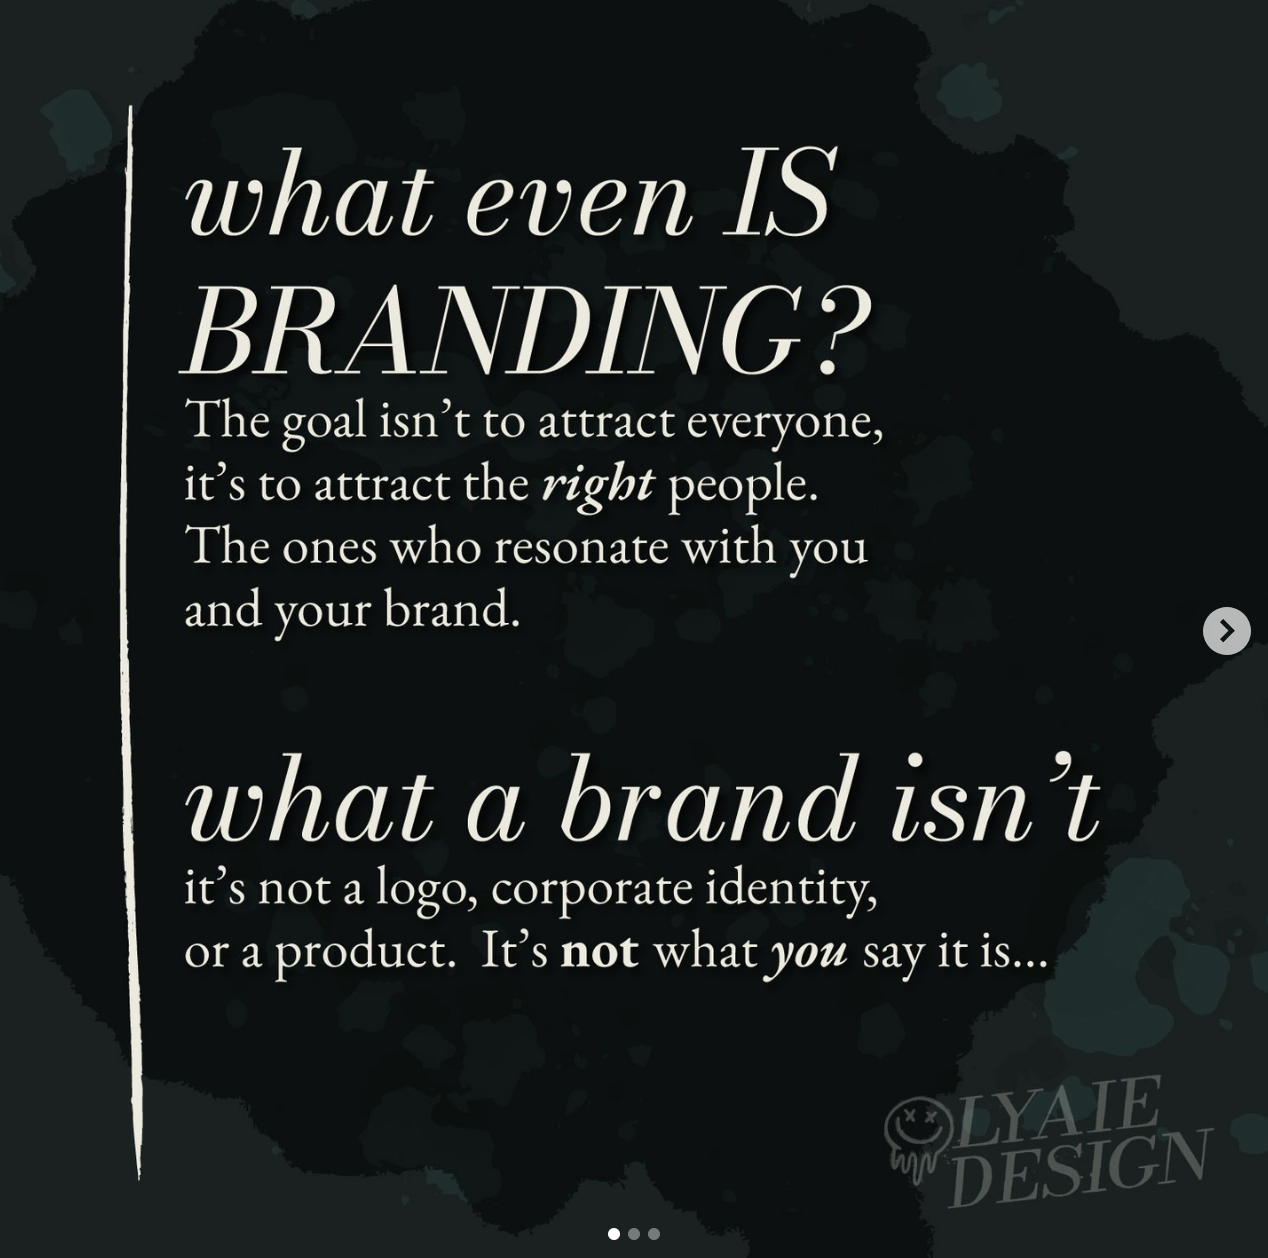 What Is branding, anyways?